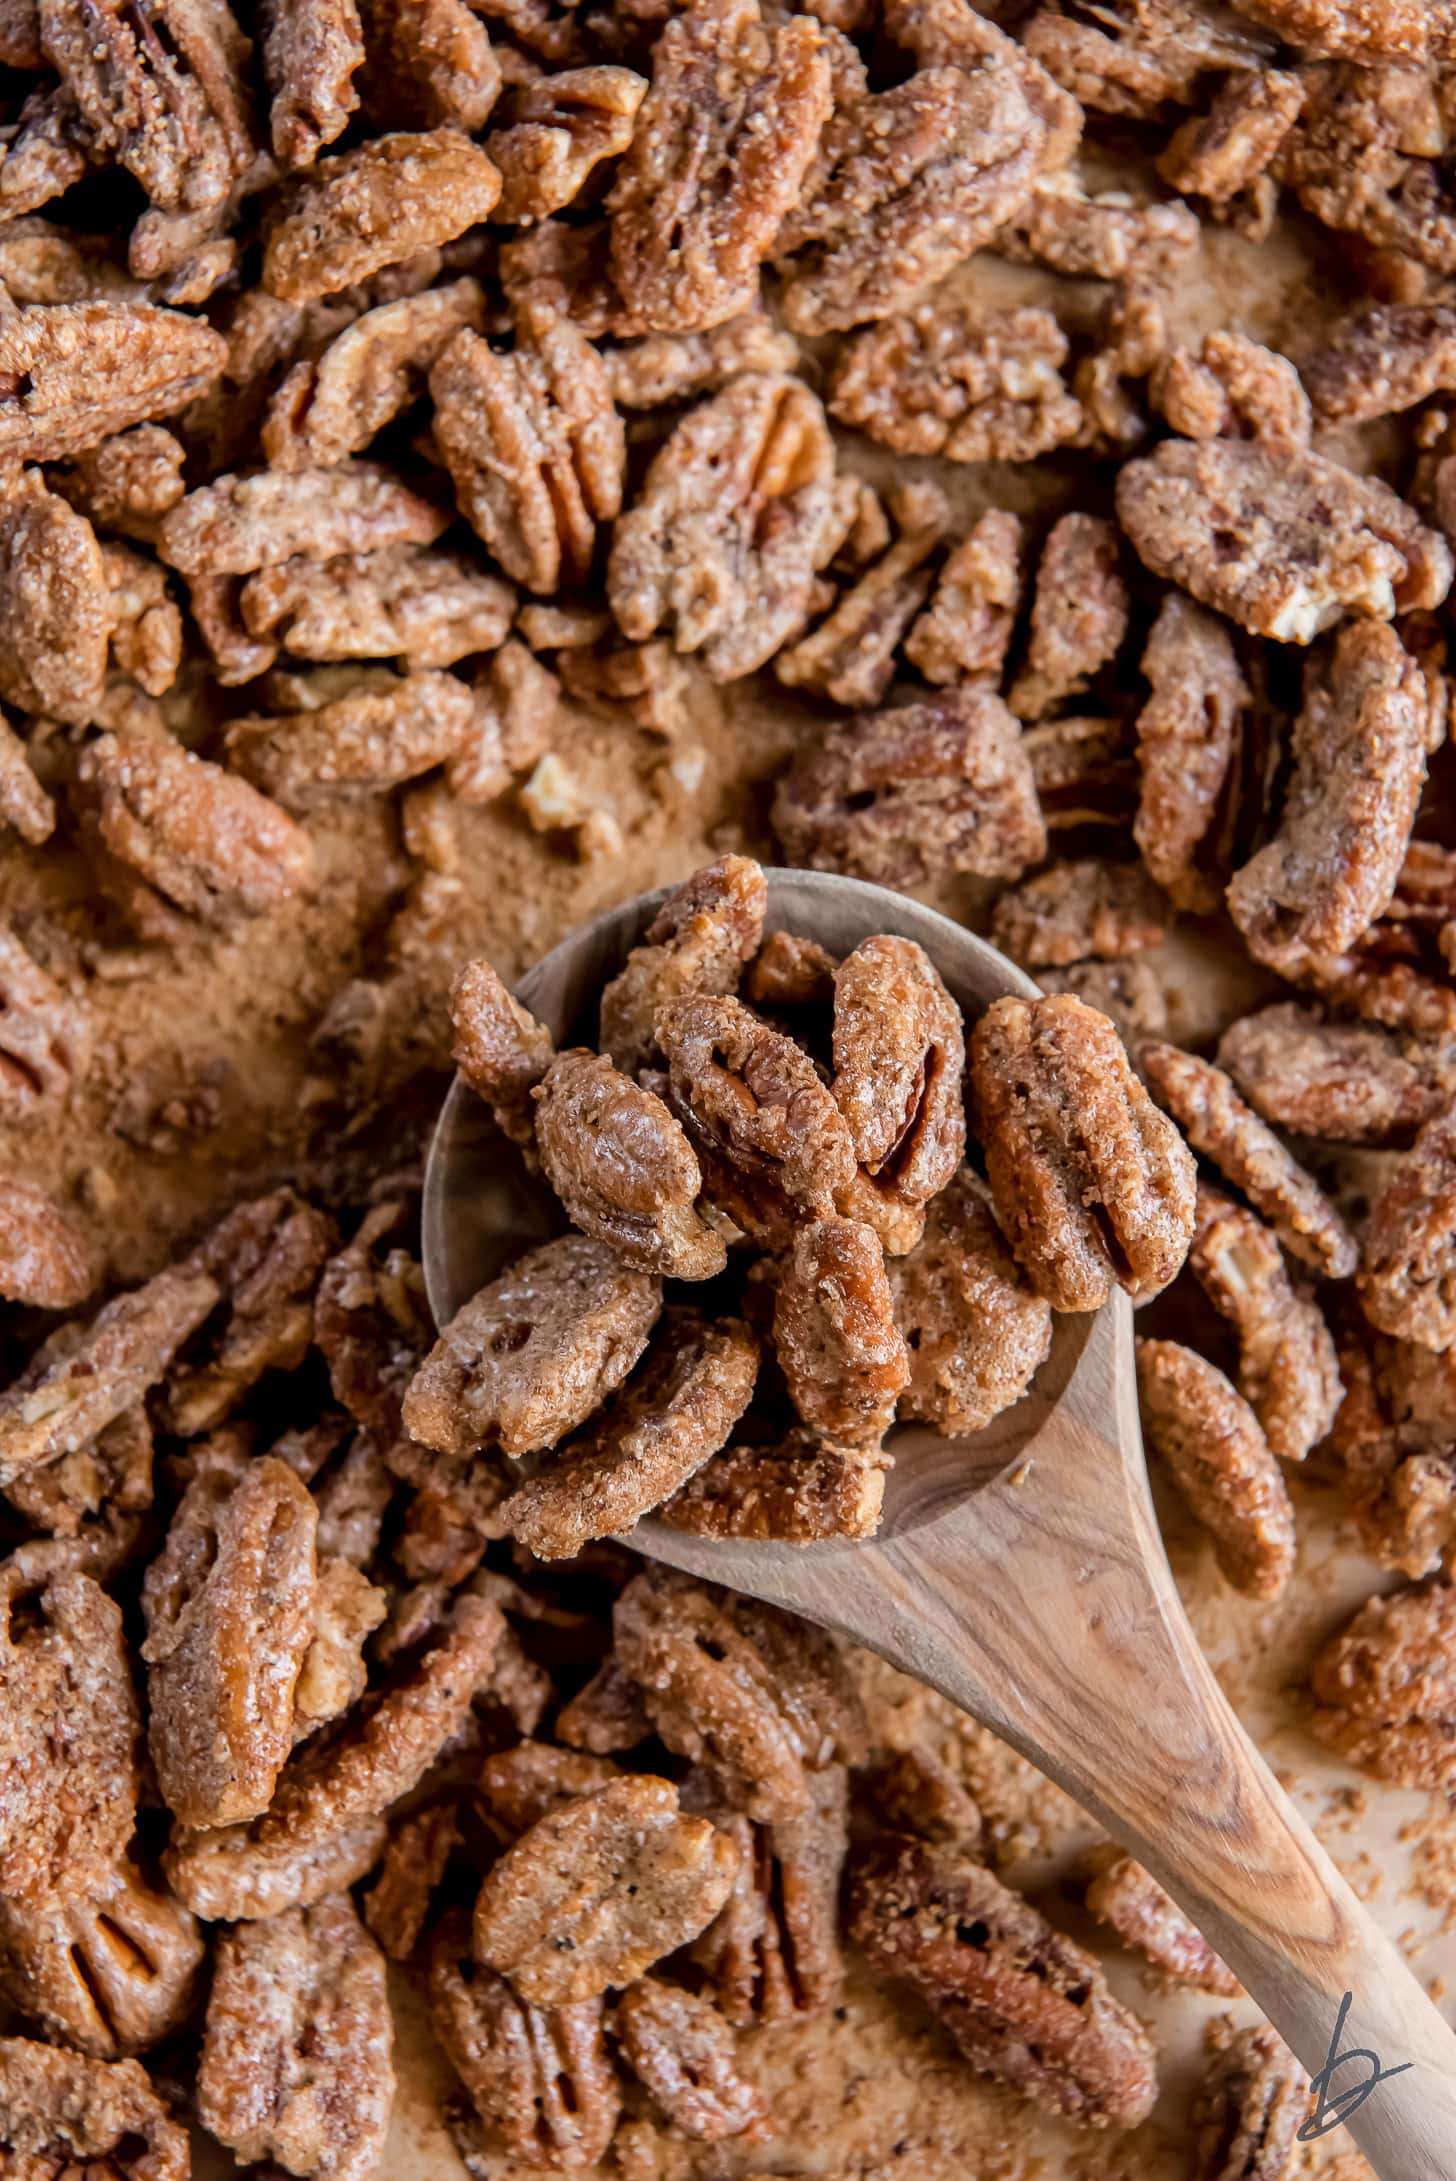 wooden spoon holding spiced pecans on baking sheet with more pecans.